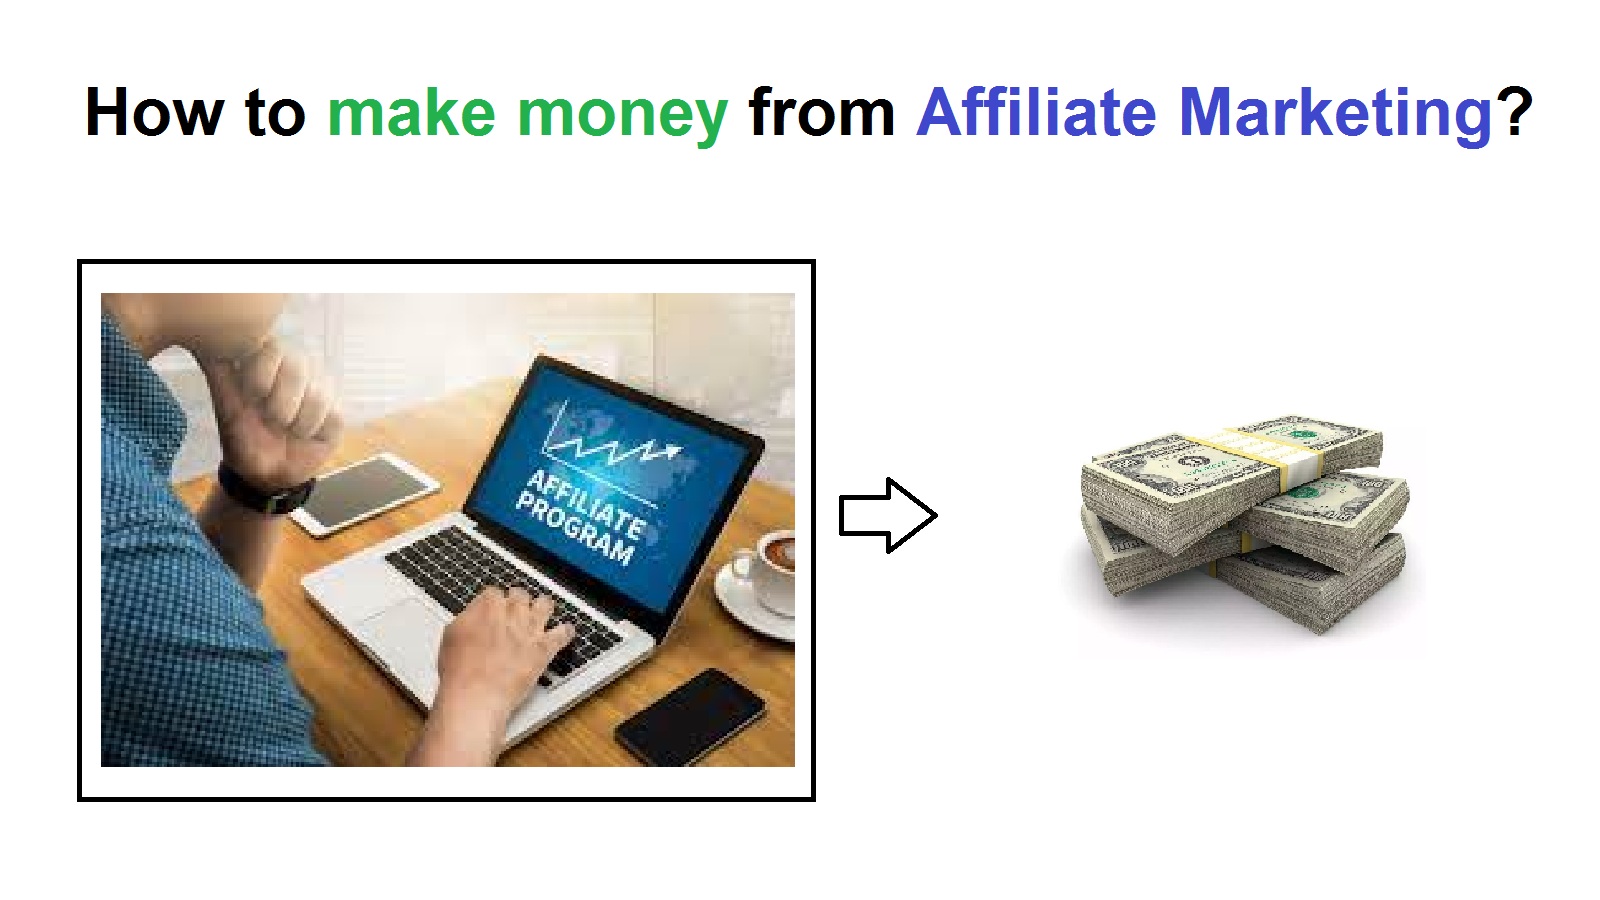 How to make money from Affiliate Marketing